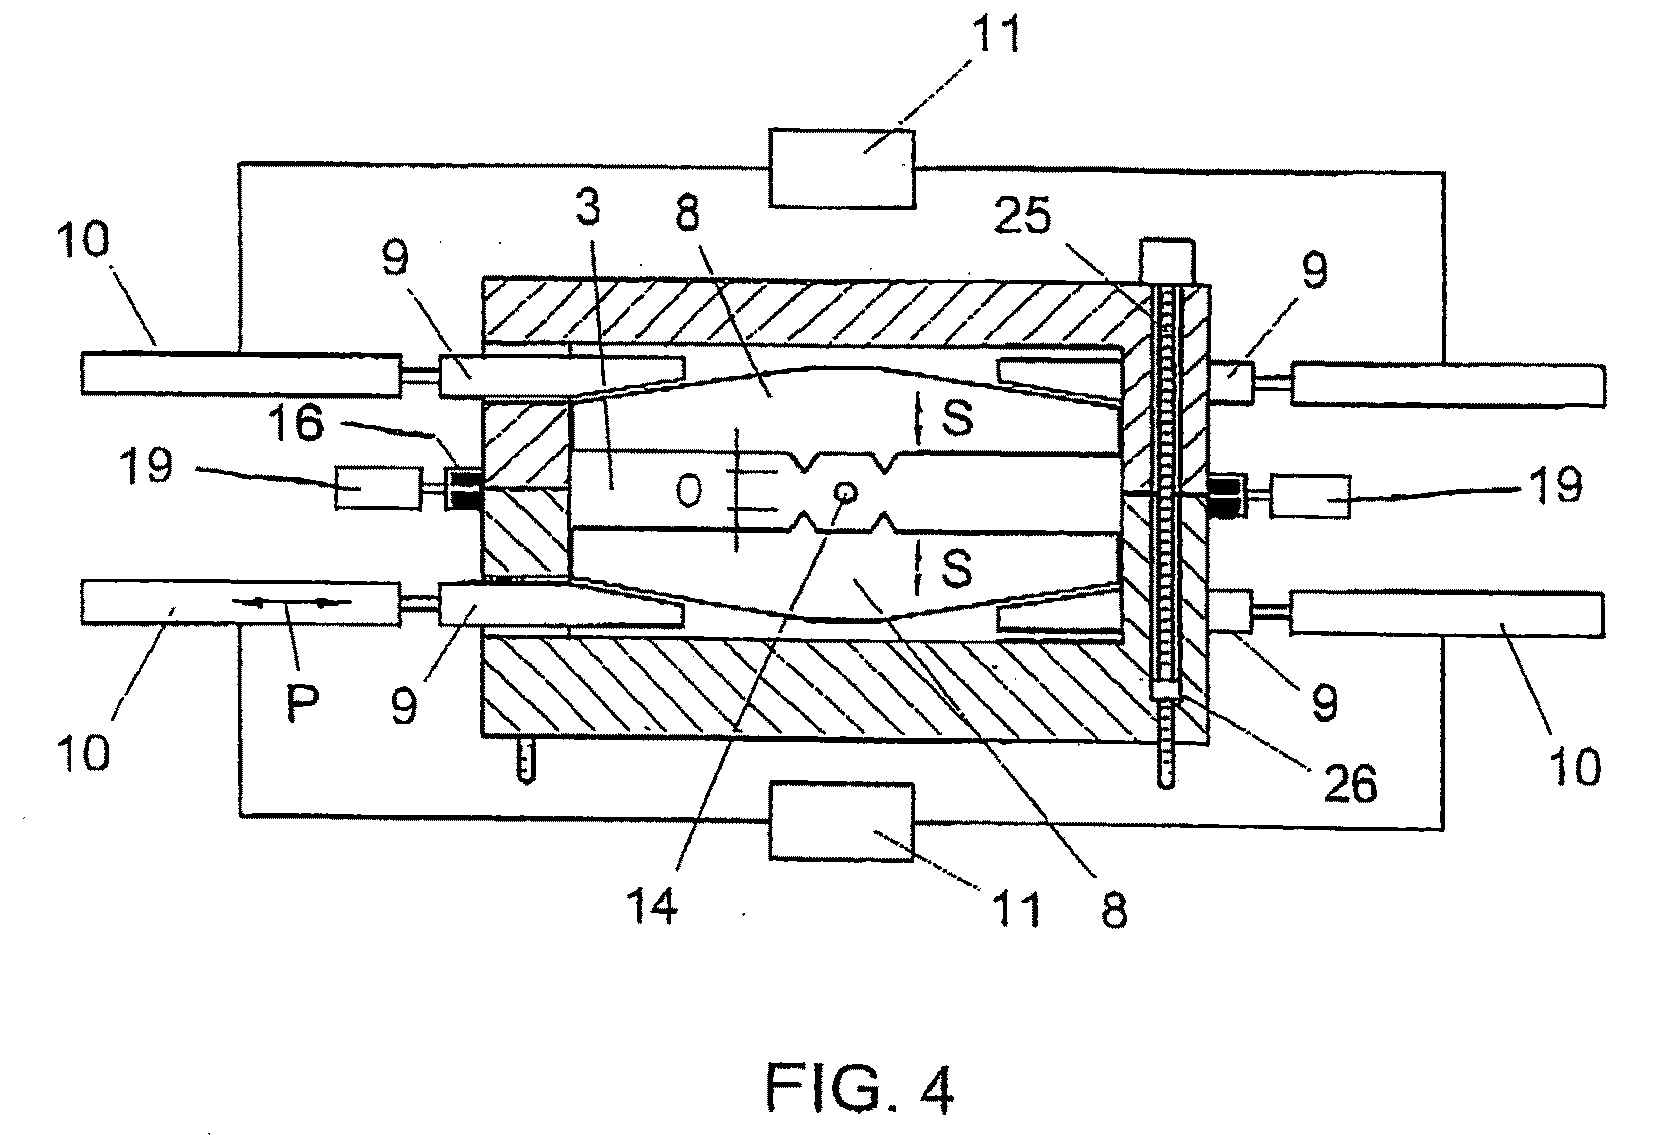 Apparatus and method for manufacturing products from a thermoplastic mass